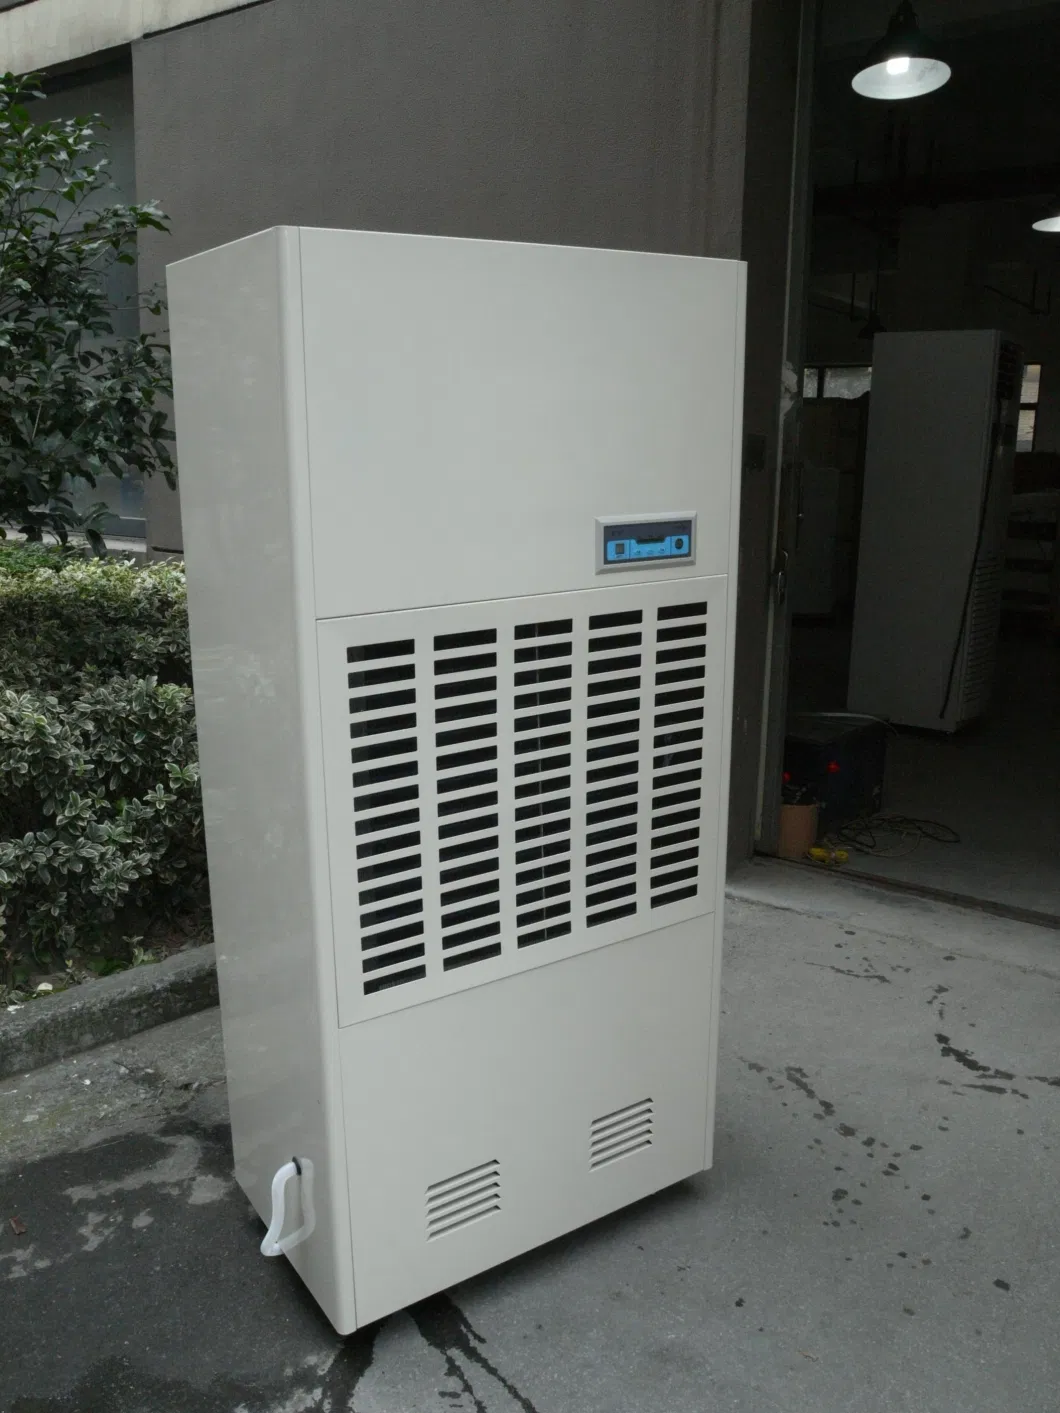 Conloon Commercial Dehumidifier OEM Brand Air Dehumidifier with Purification for Greenhouse